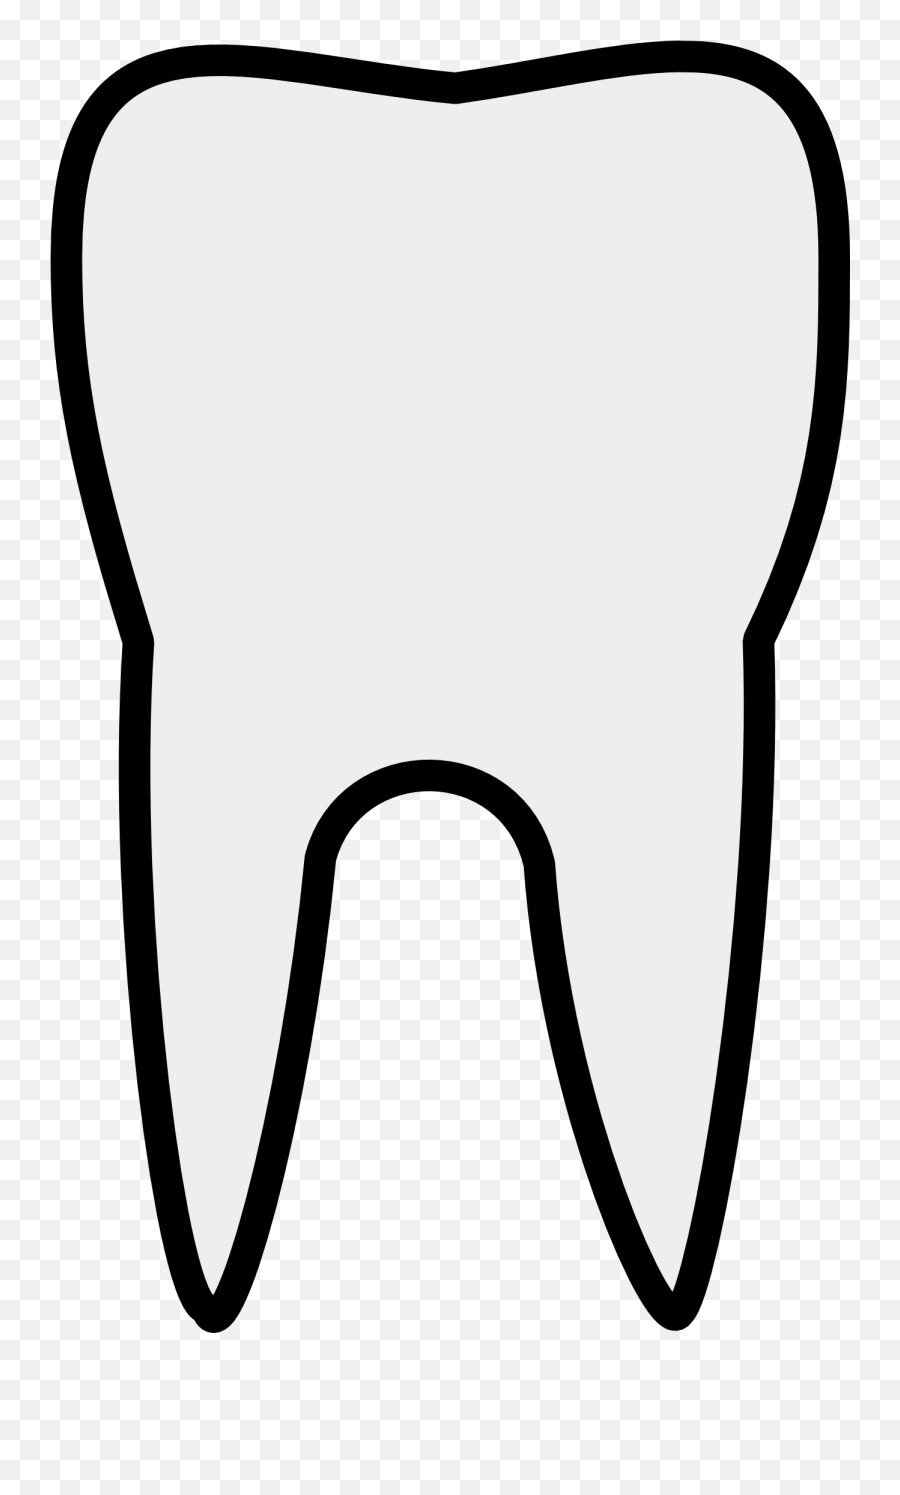 Images Of Tooth - Clipart Best Clipart Panda Free Tooth Clipart Png,Tooth Clipart Png